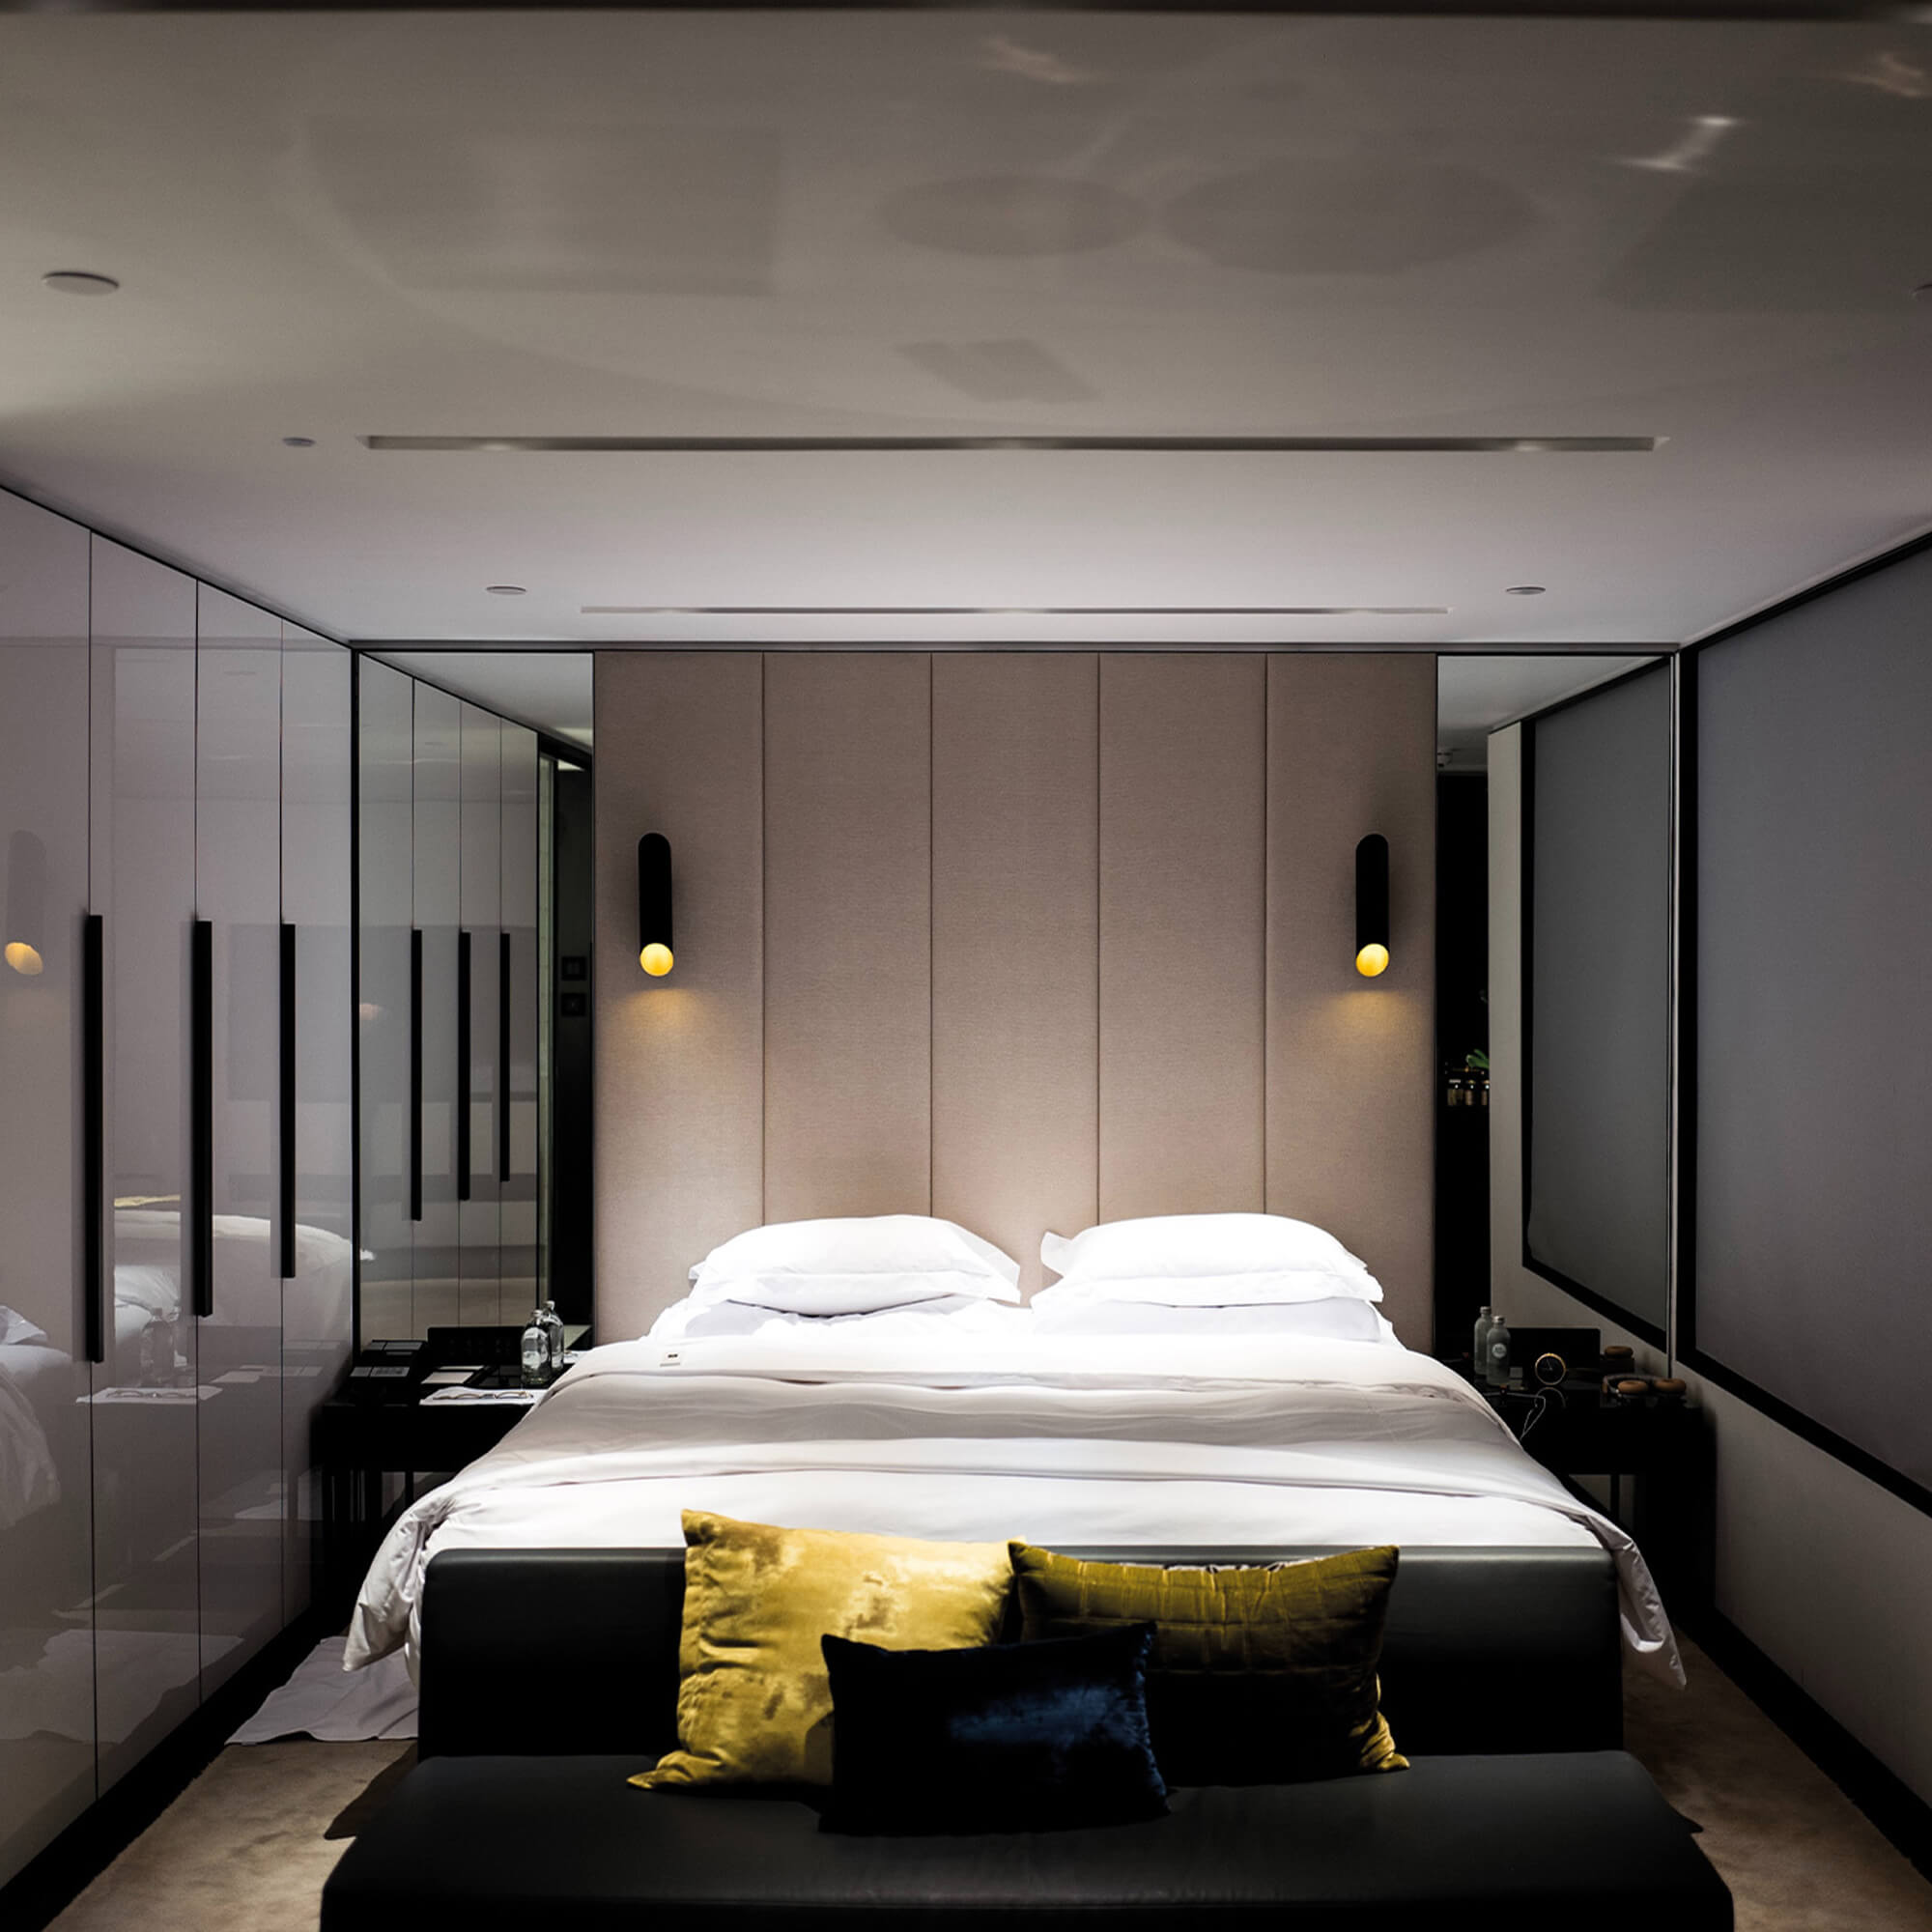 Bedroom example image for Spaces by Design